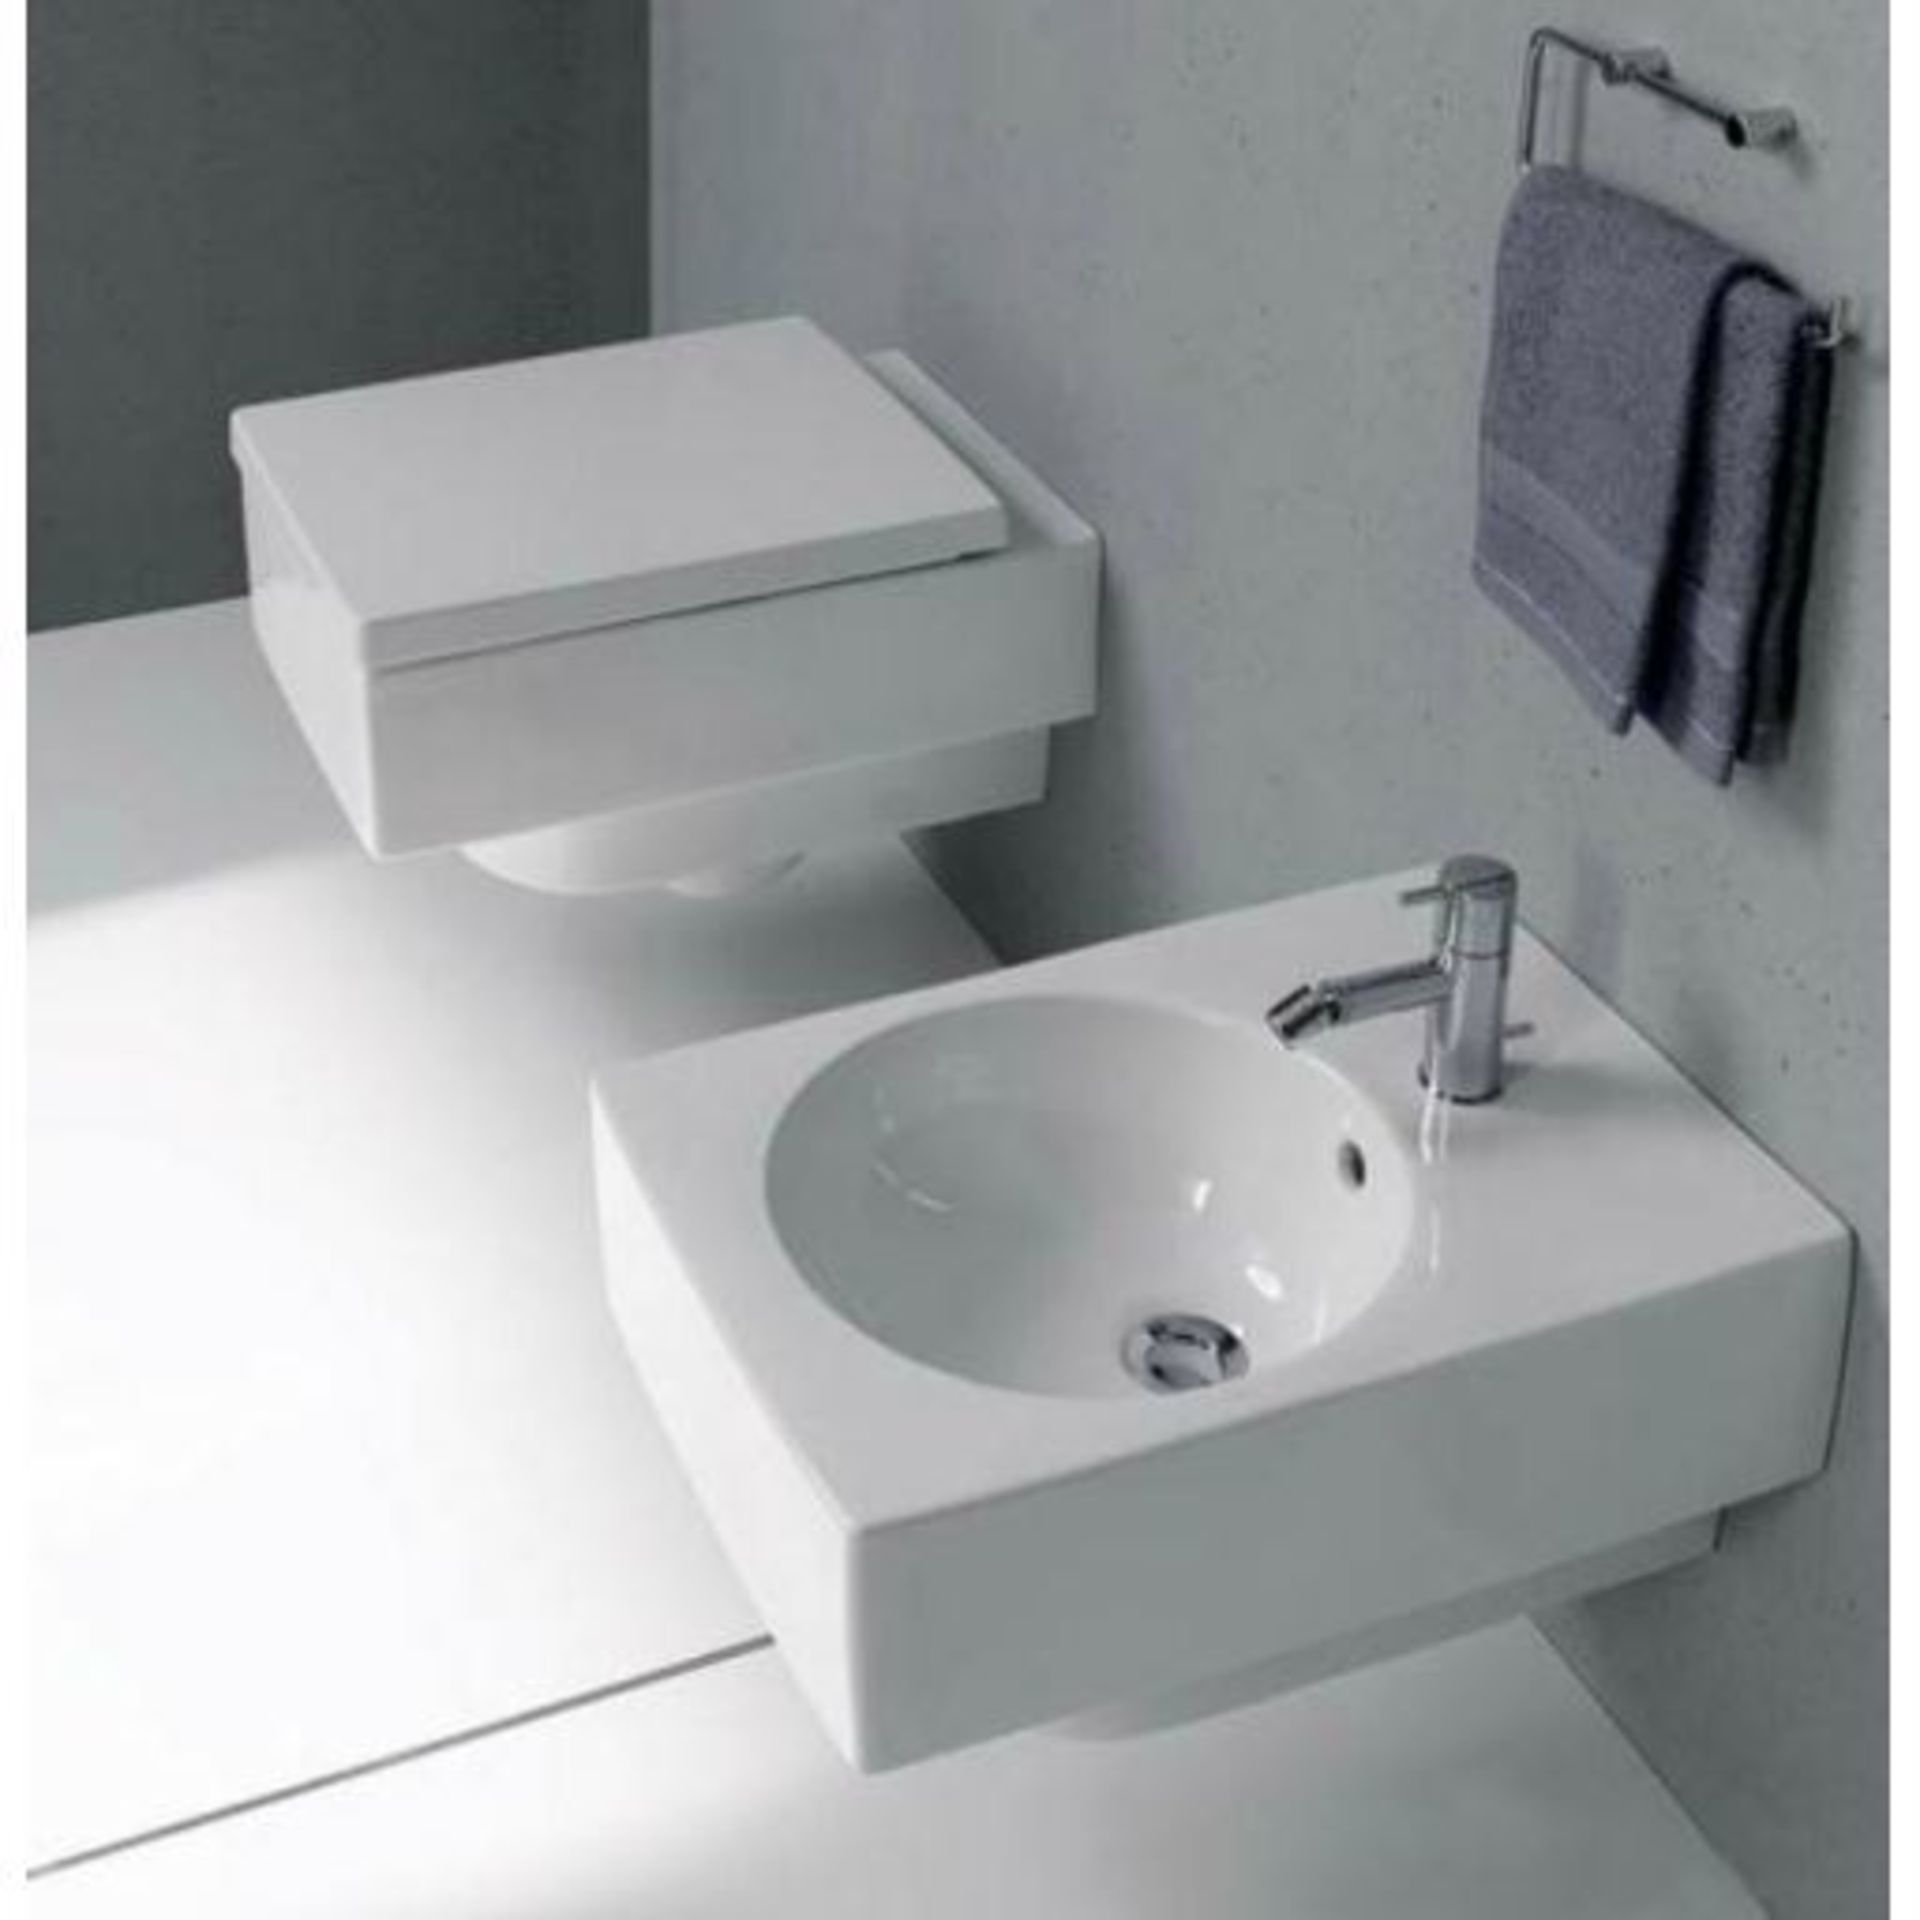 Brand New (PC59) Keramag Preciosa - Wash-down Wall Hung Toilet. wall hung Fits effortlessly into eve - Image 3 of 4